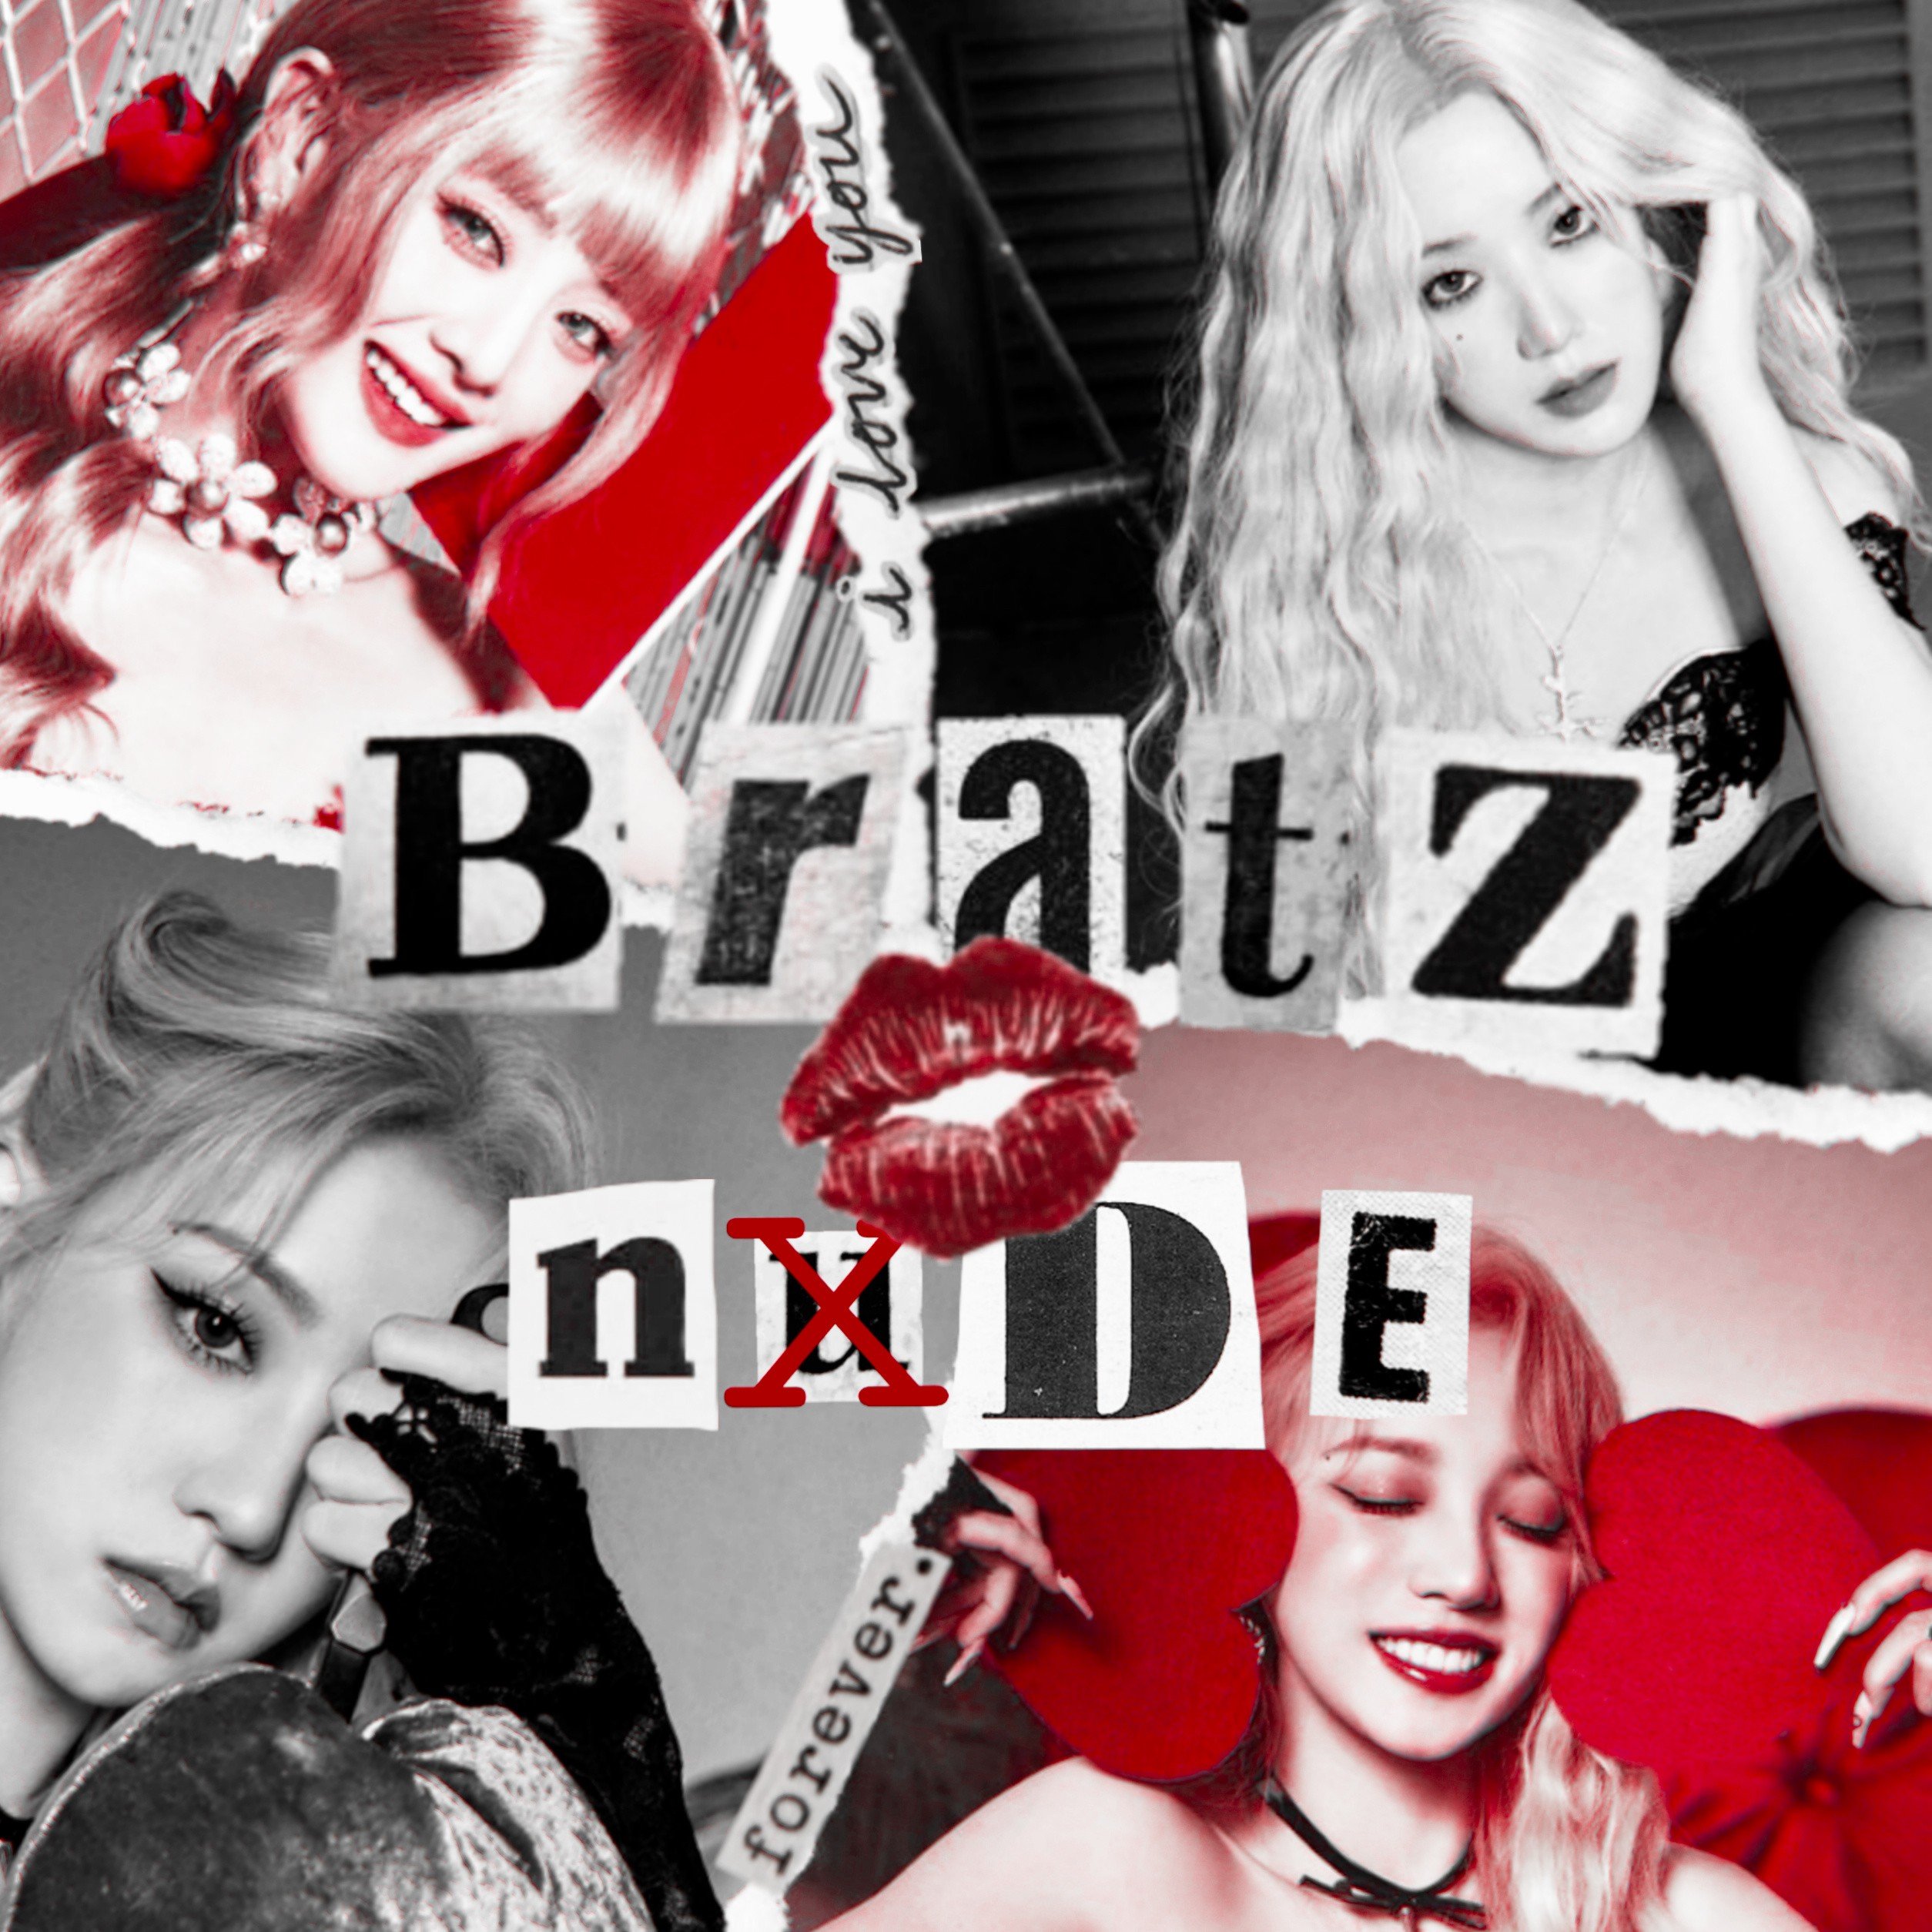 𝕭aby, how do we 𝐥ook? 𝐭he most 𝐝ivine and g𝐥amorous bra𝐭z ✽ 𓈒࿓ are back and ready to 𝐬how the secret 𝒇ile ‘bout a 𝐥uxur𝚢 » 𝐧𝖝de « 👠